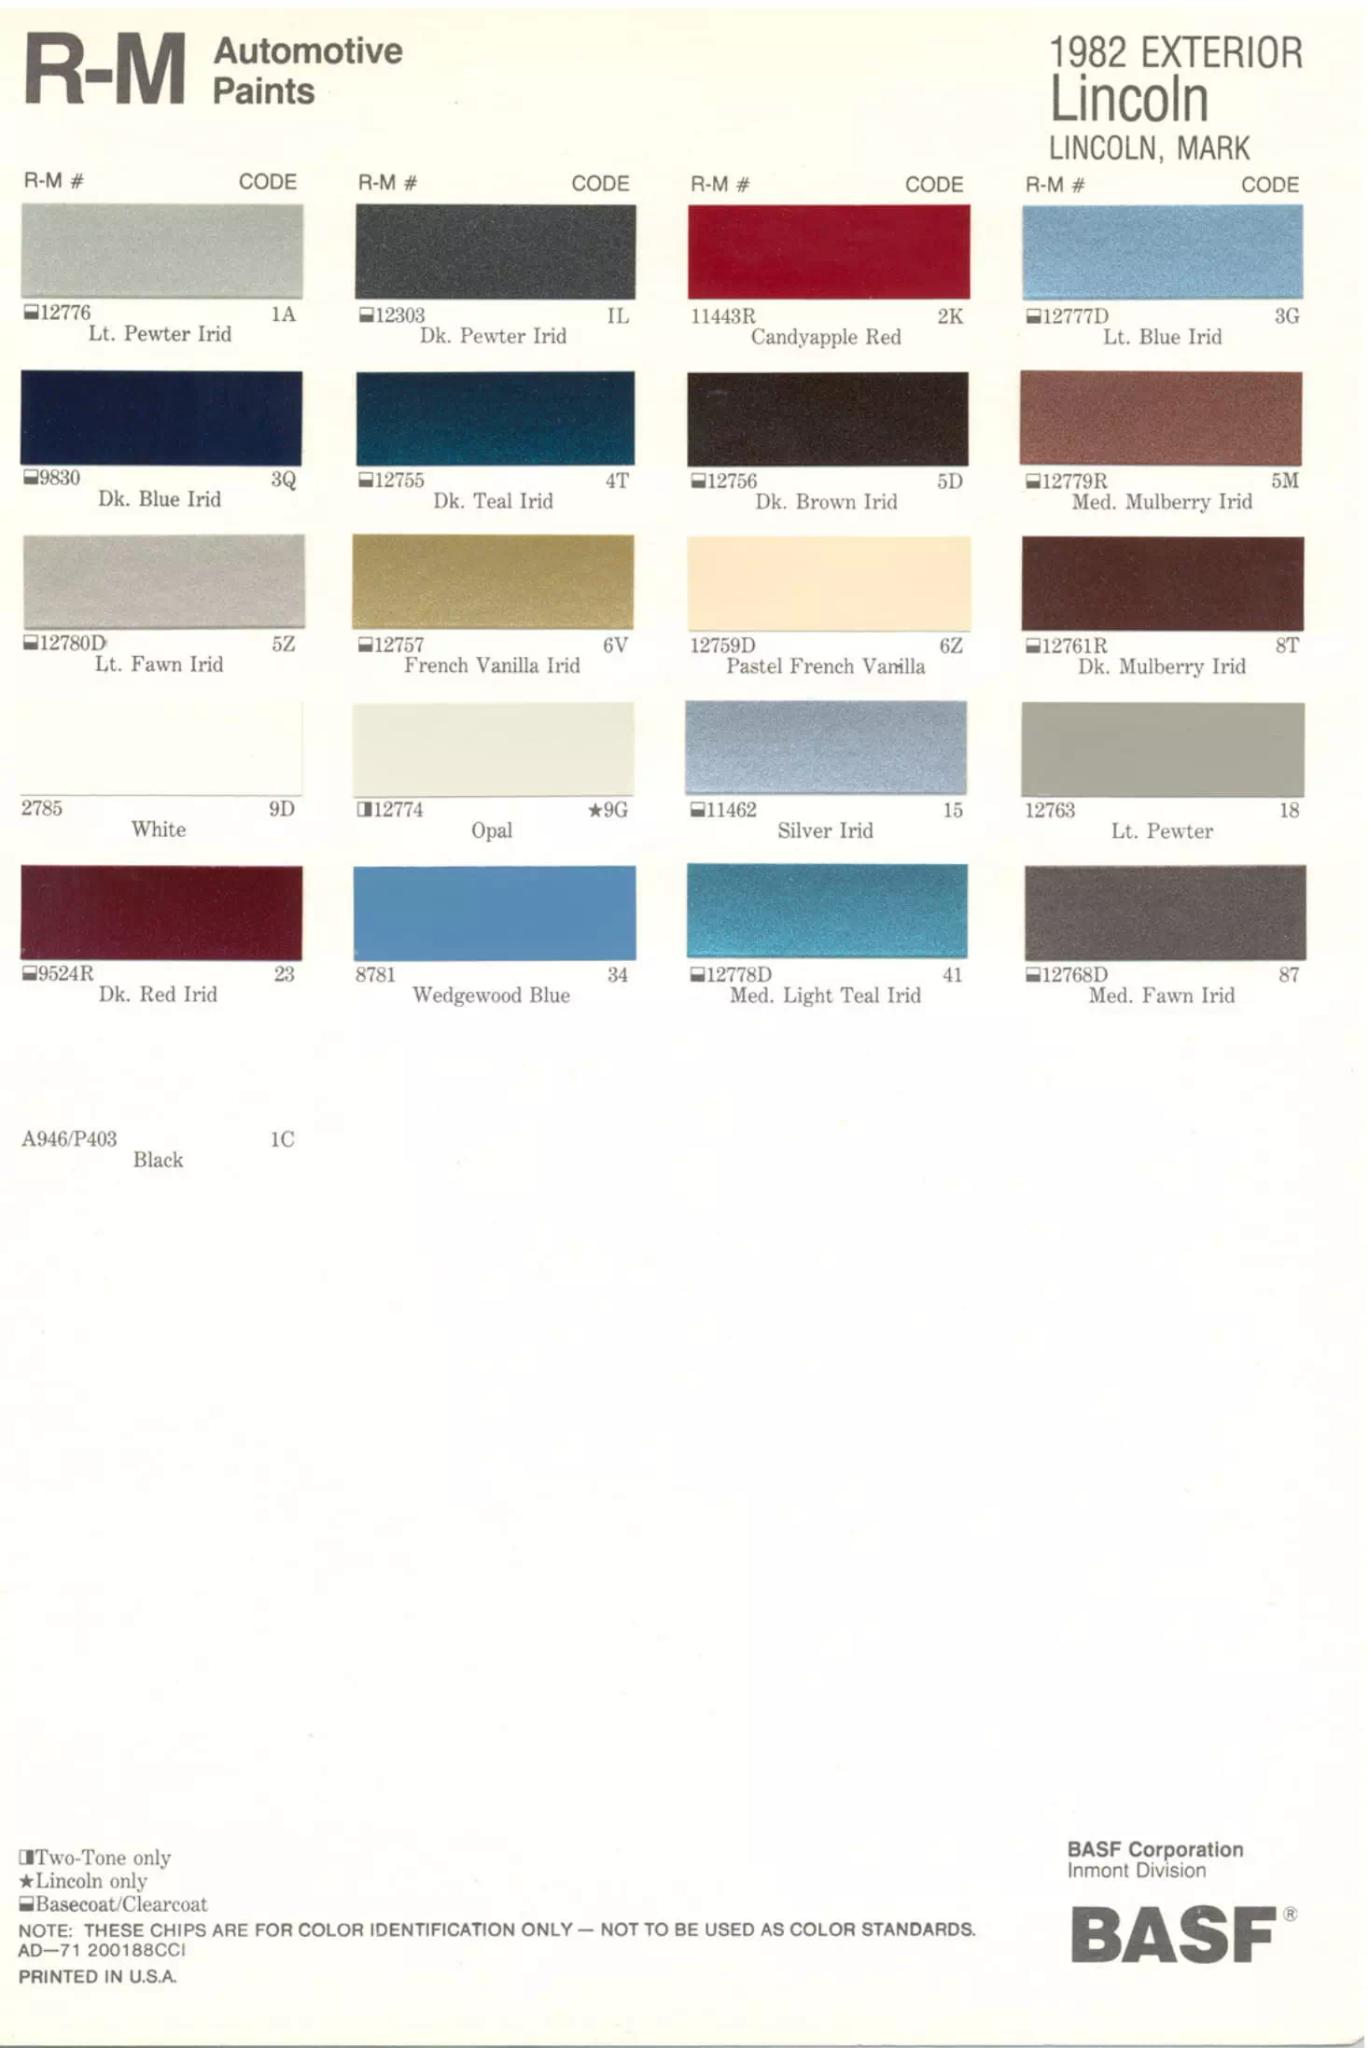 Colors, Codes and Examples used in 1982 on Lincoln Vehicles